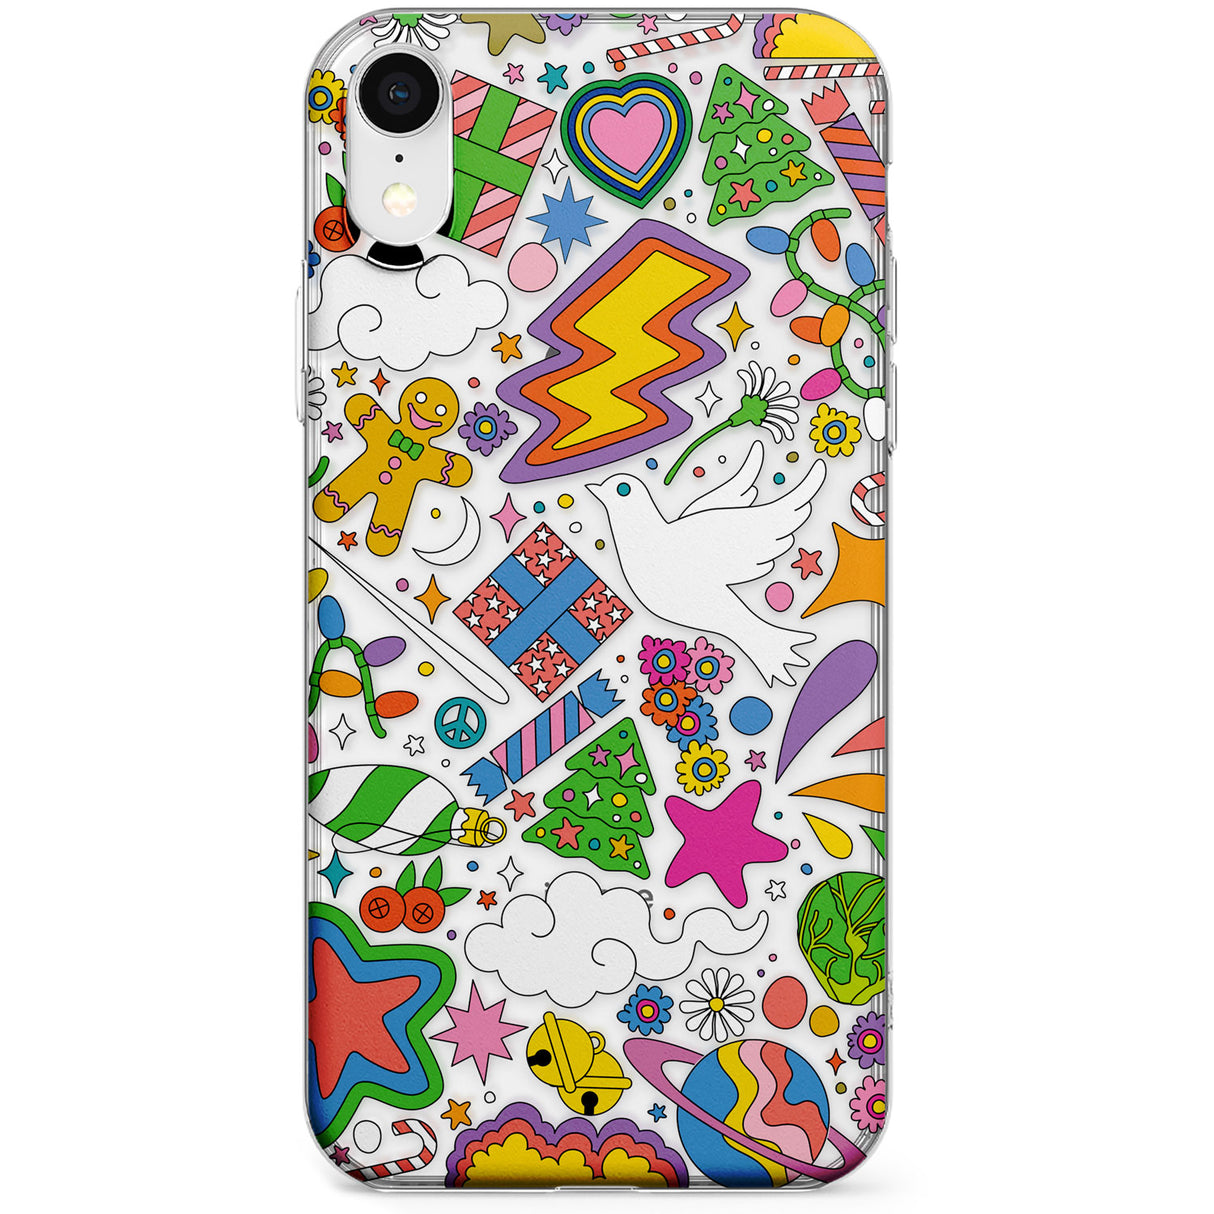 Whimsical Wonderland Phone Case for iPhone X, XS Max, XR